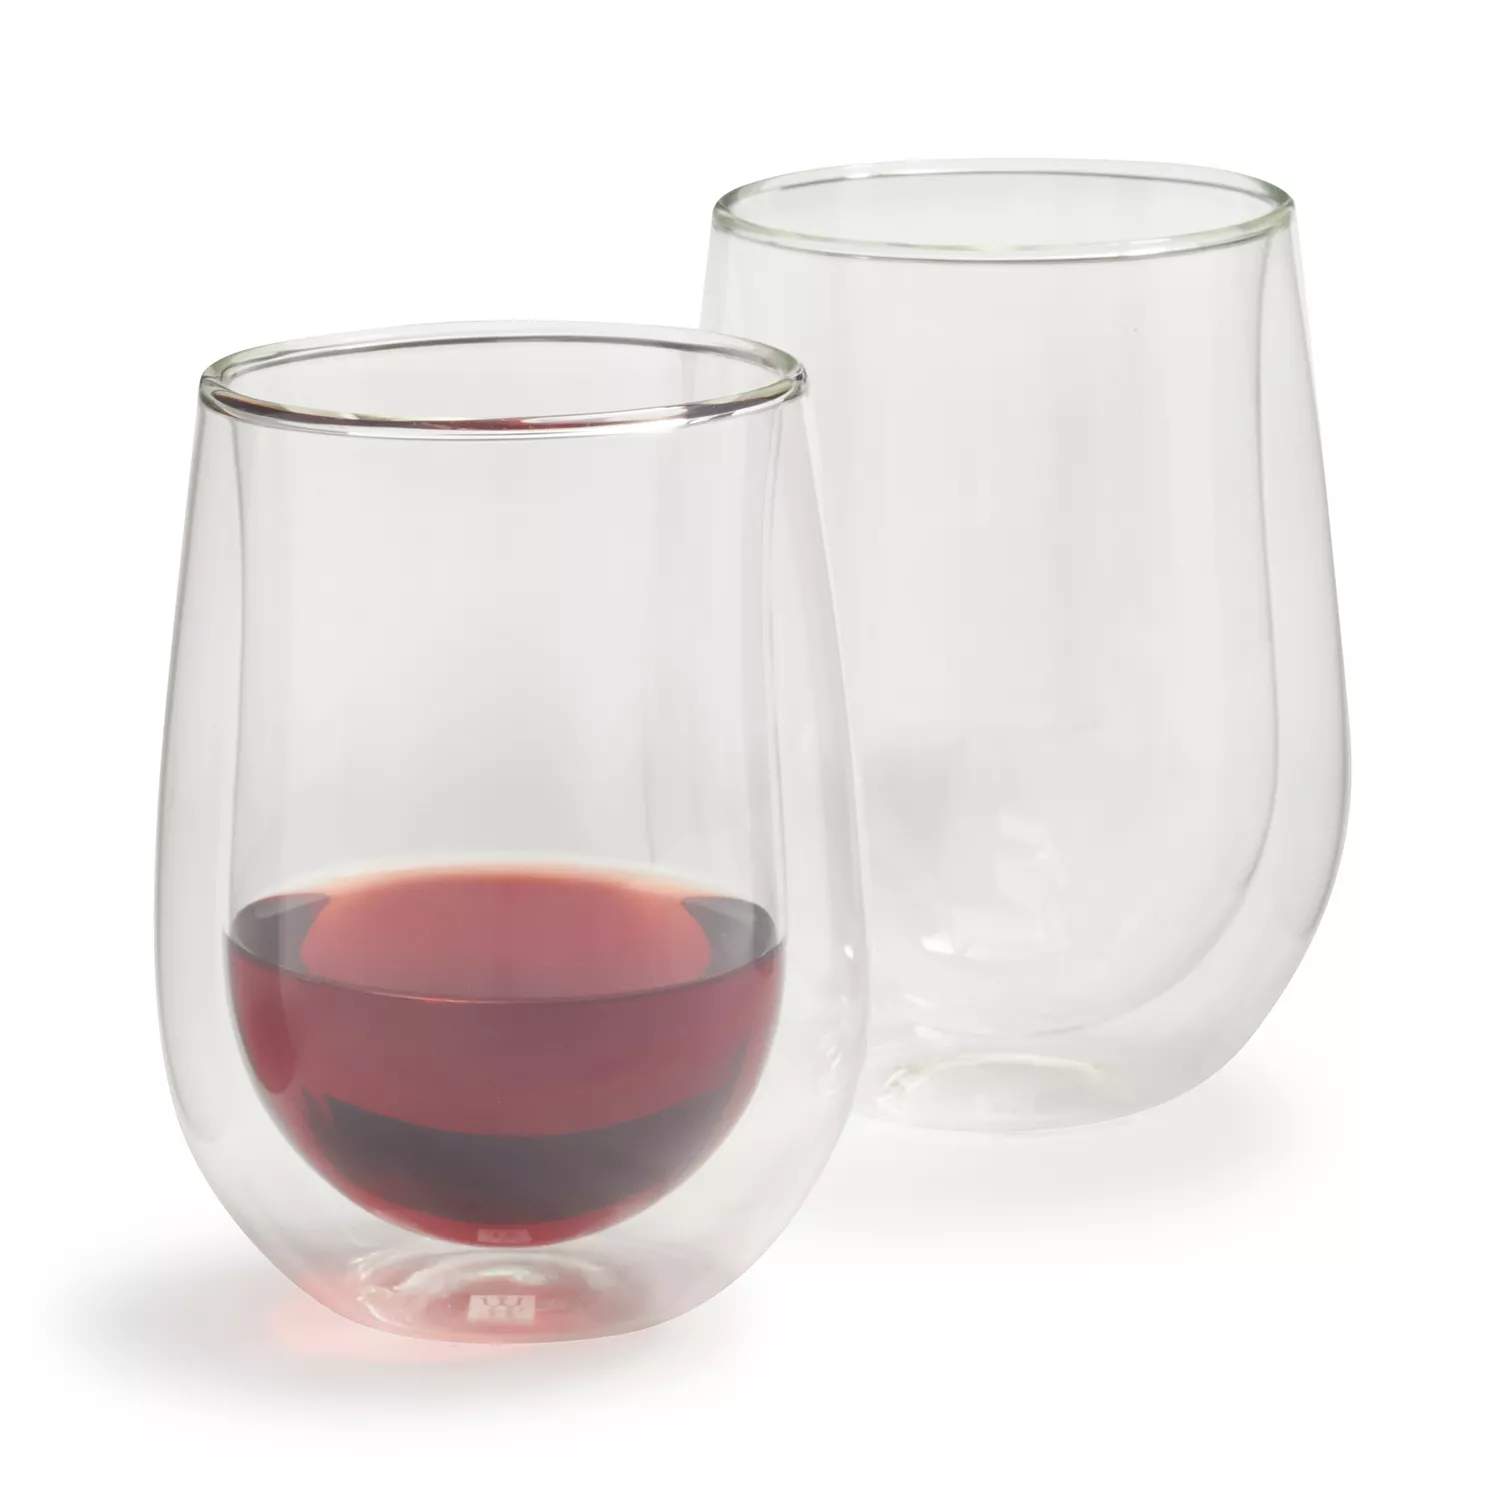 Zwilling Sorrento Double-Wall Red Wine Glasses, Set of 2